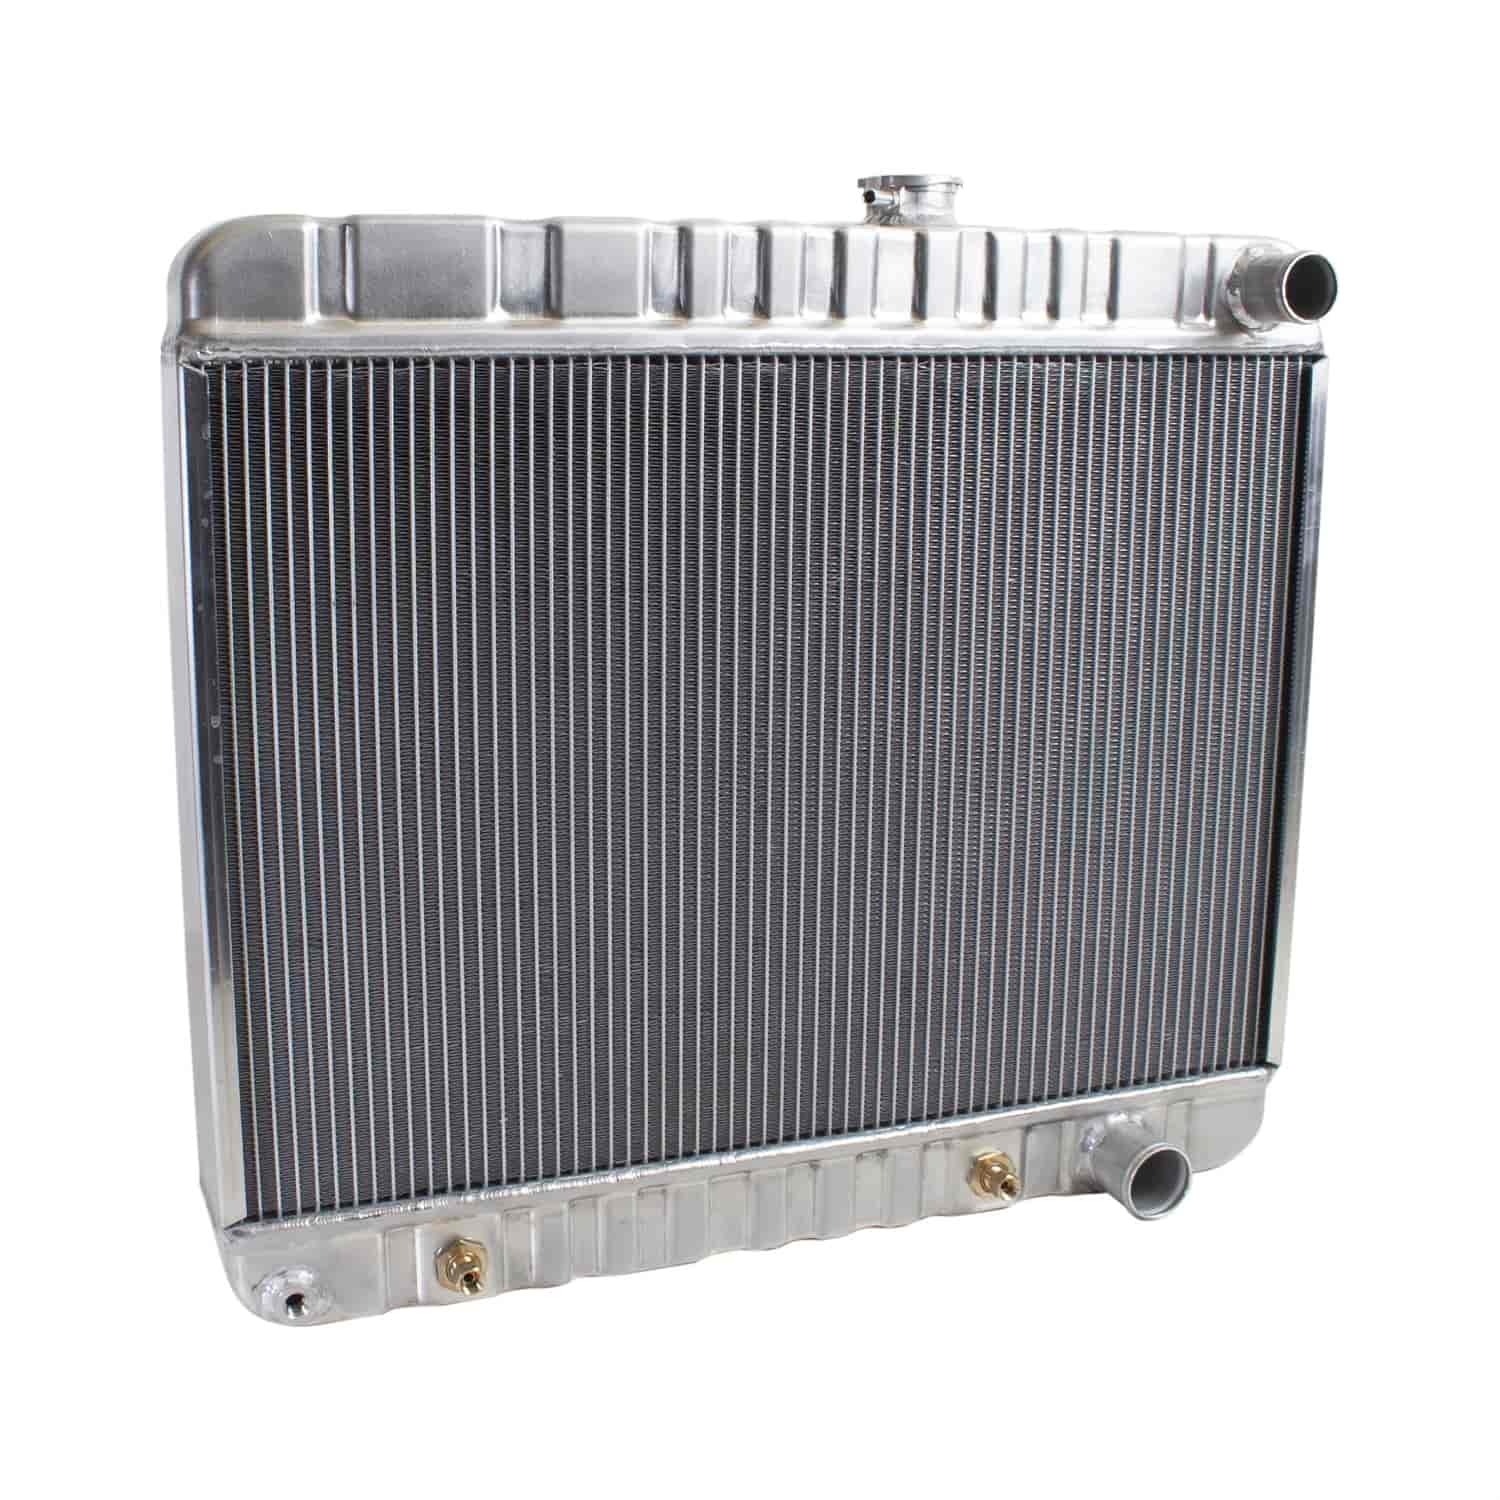 ExactFit Radiator for 1964-1965 GTO/Lemans/Tempest with